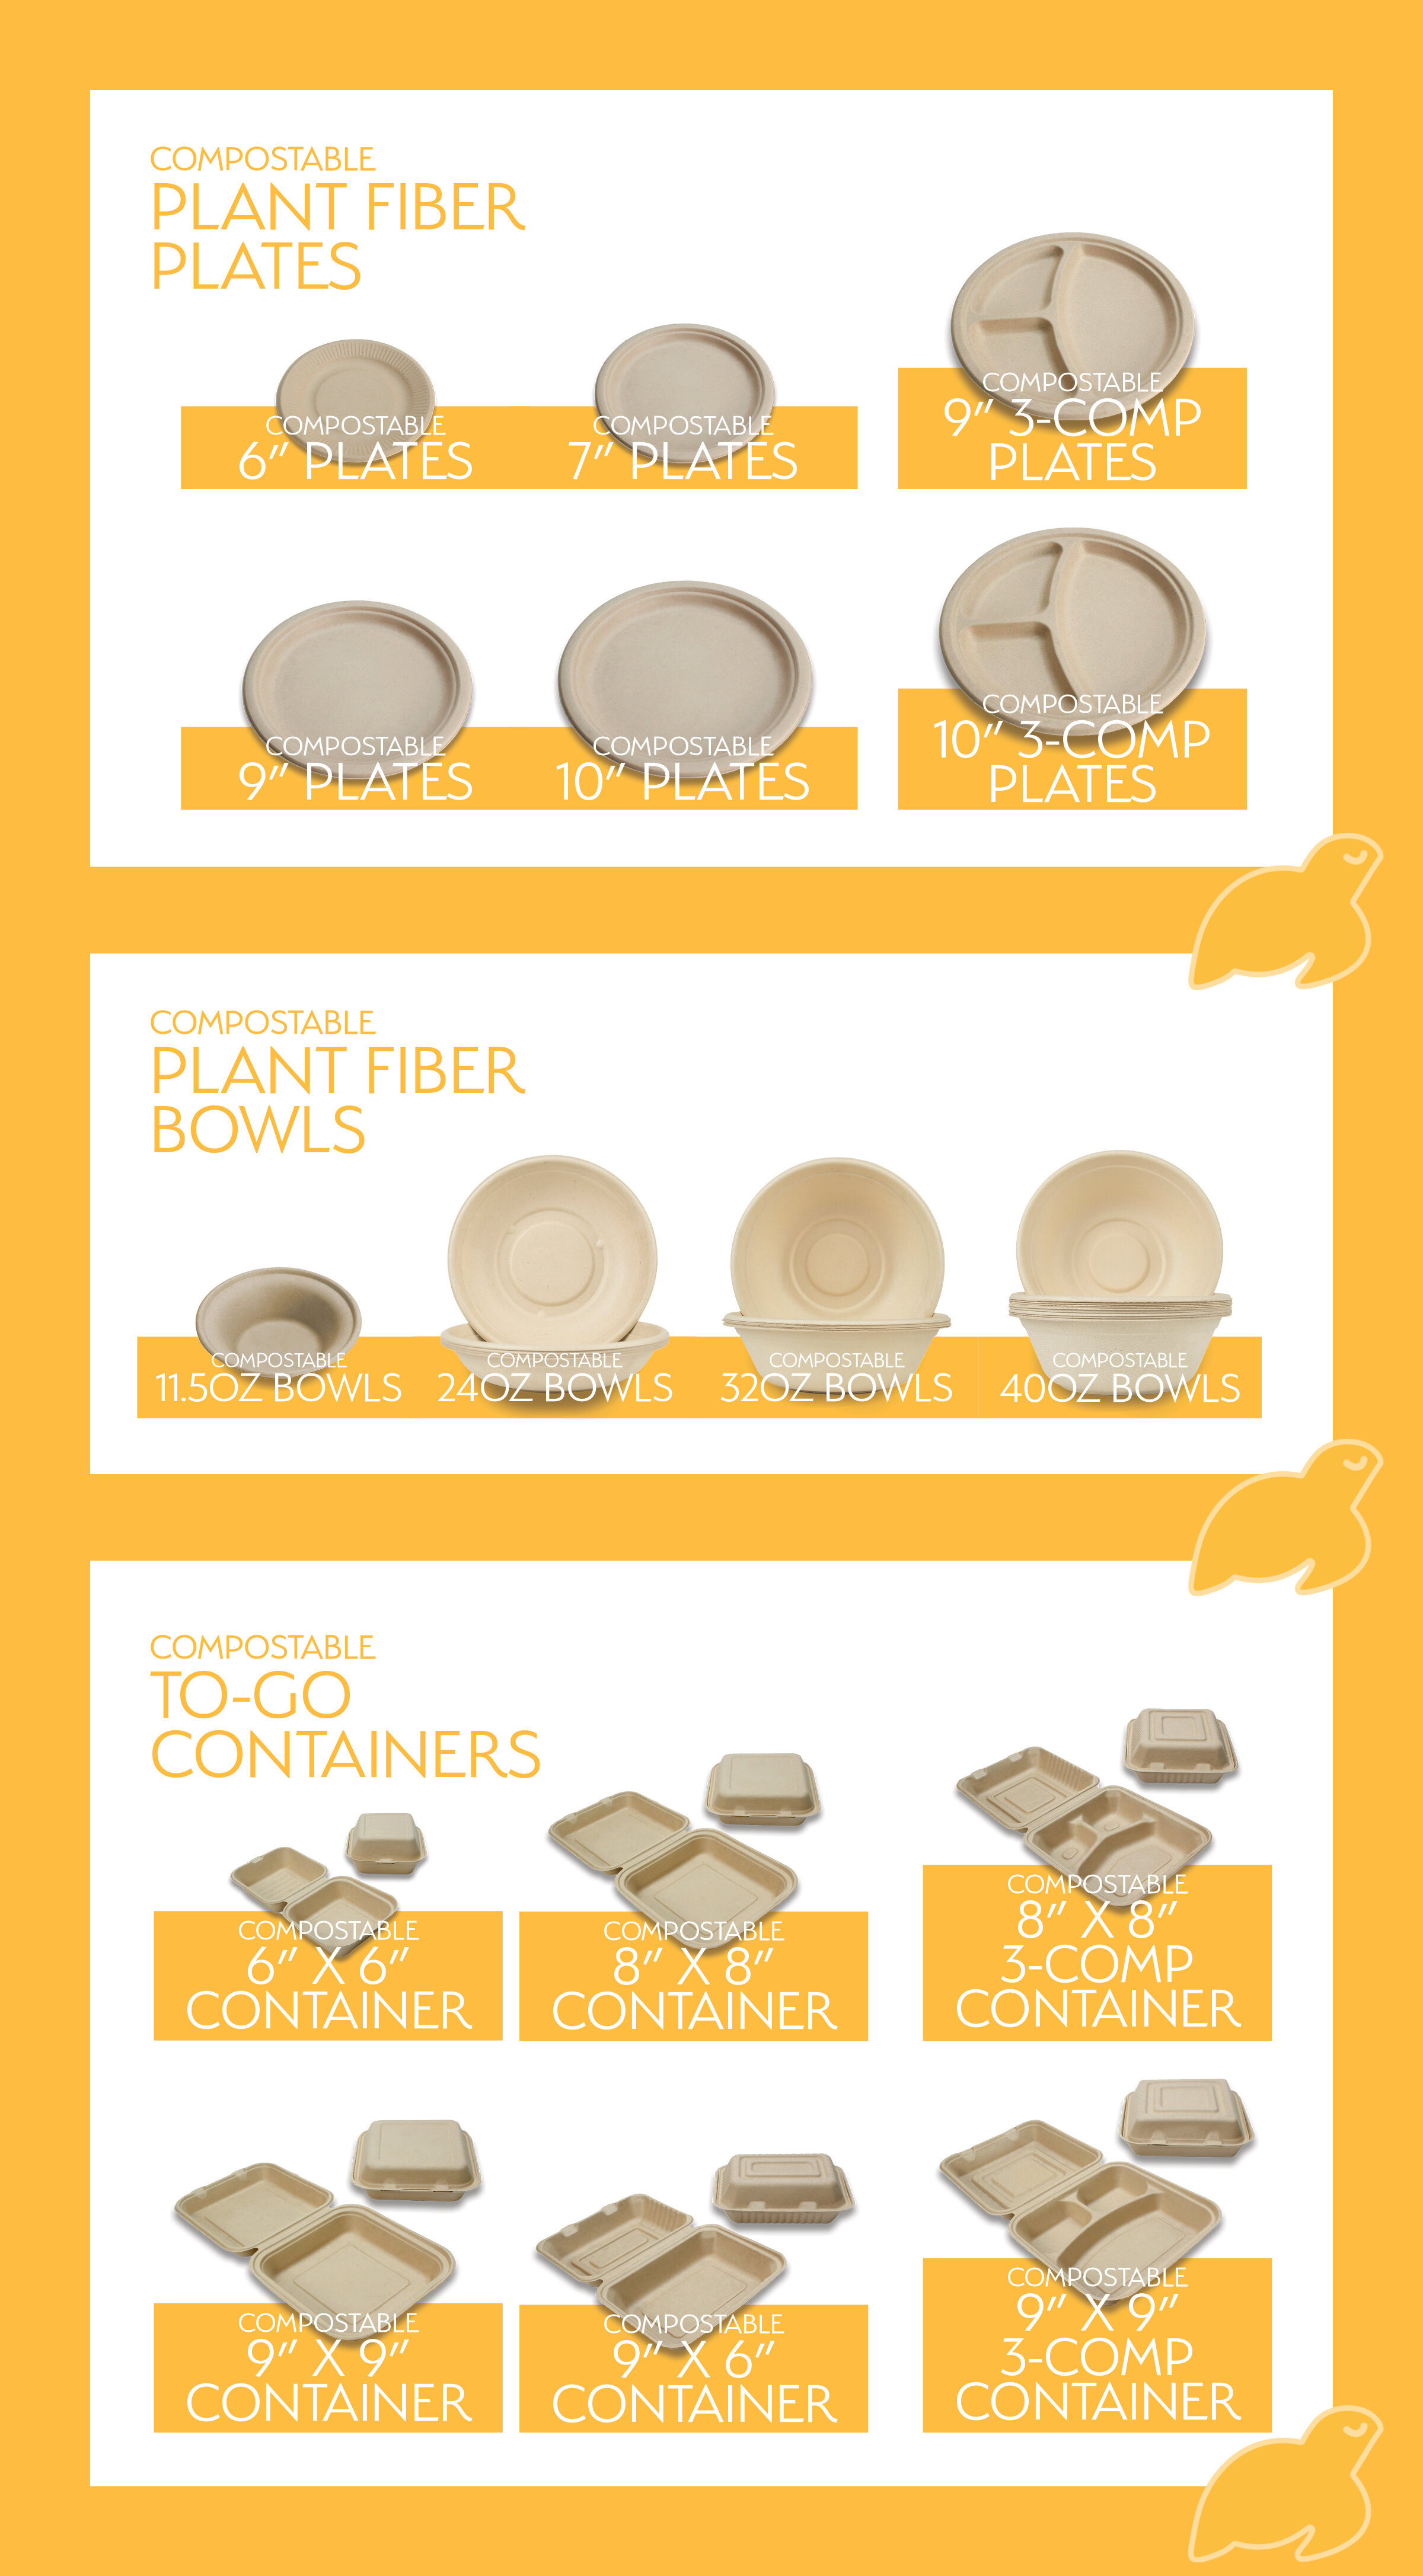 Earths Natural Alternative Eco-Friendly 50 Count Natural Compostable Plant Fiber 9 Plate Natural